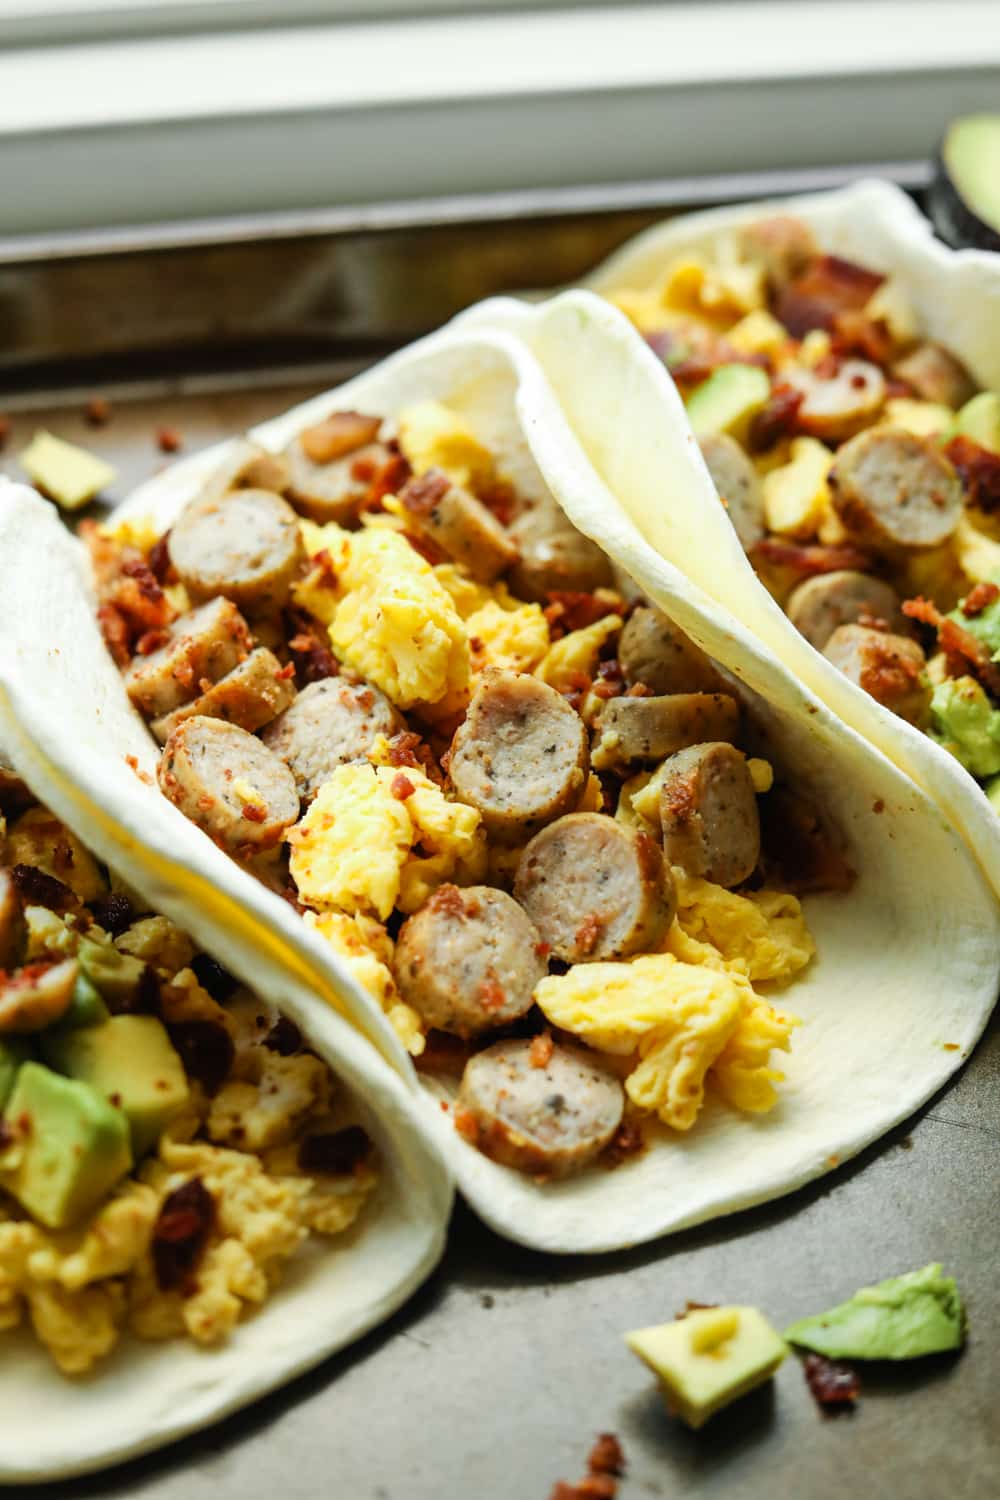 An egg white tortilla filled with sausage, eggs, and bacon.